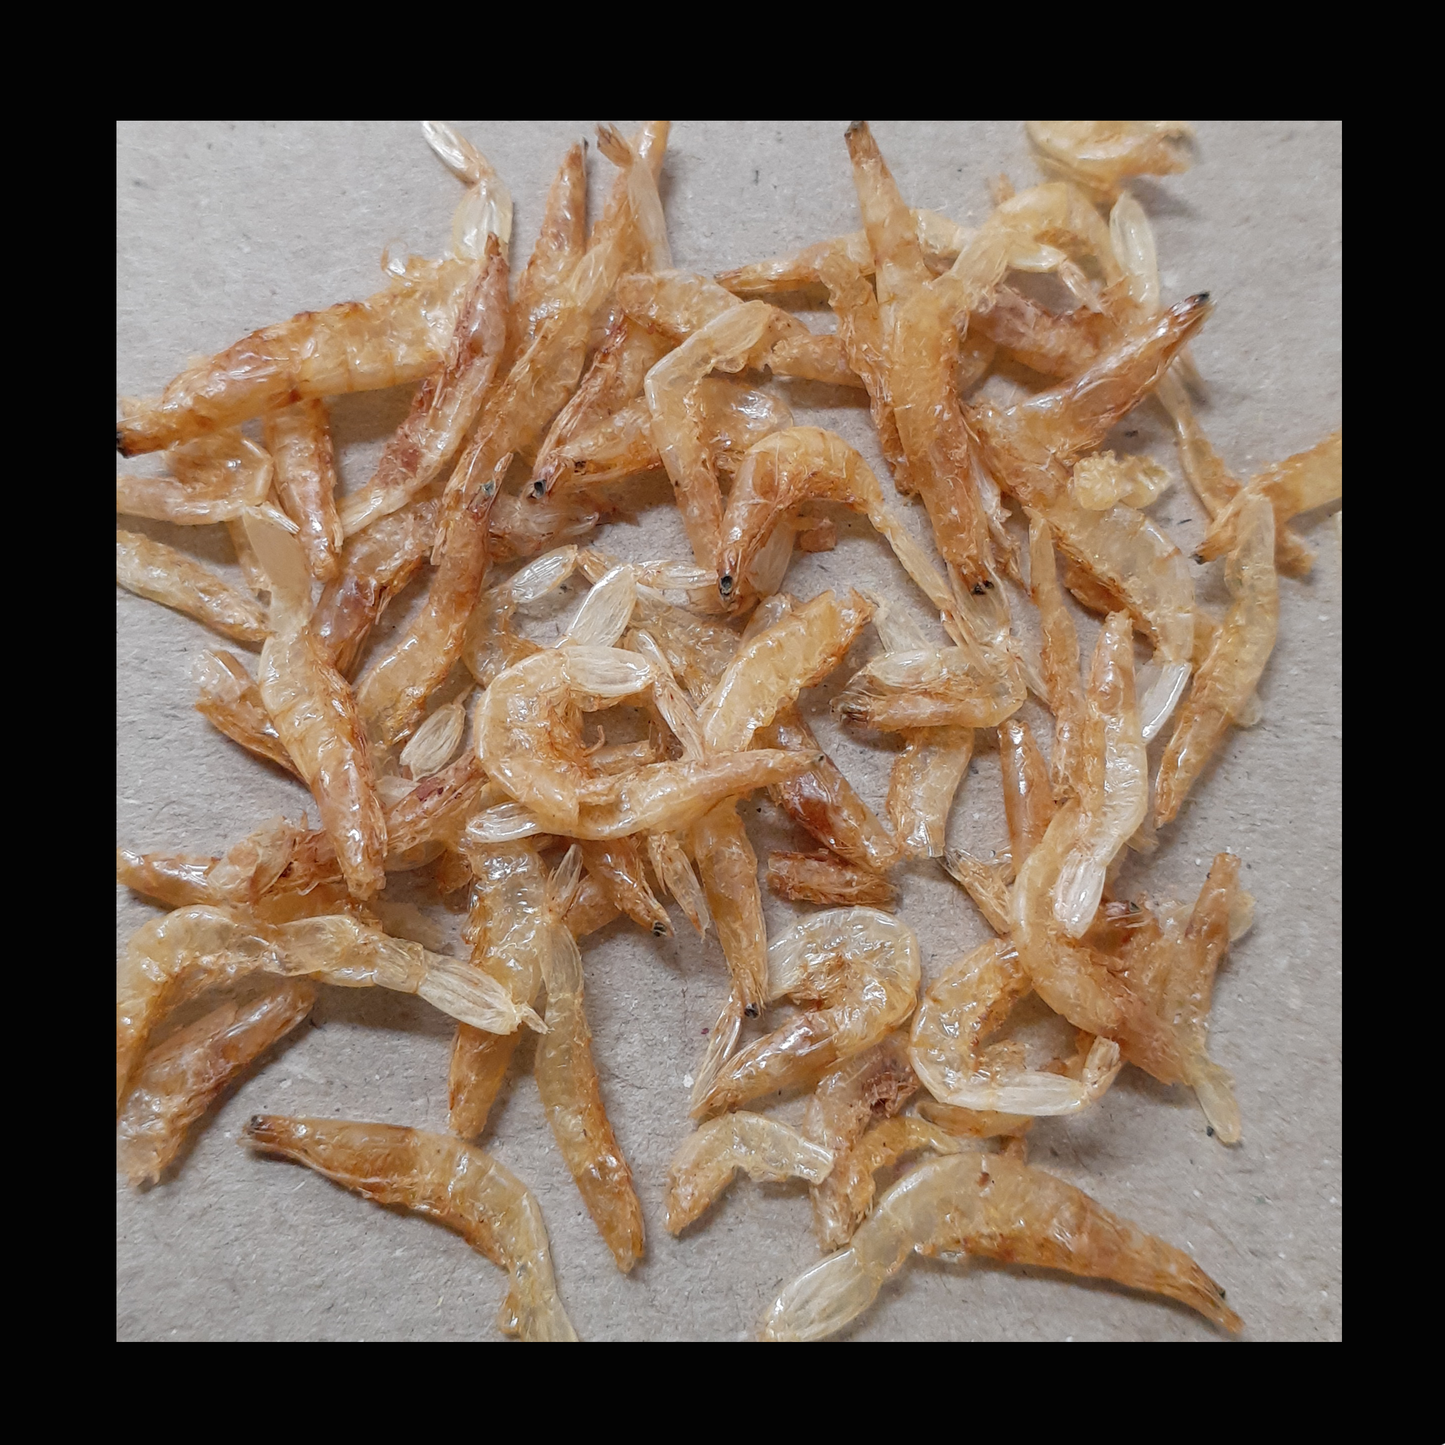 Whole Dried Shrimp 50g High Protein Fish Food